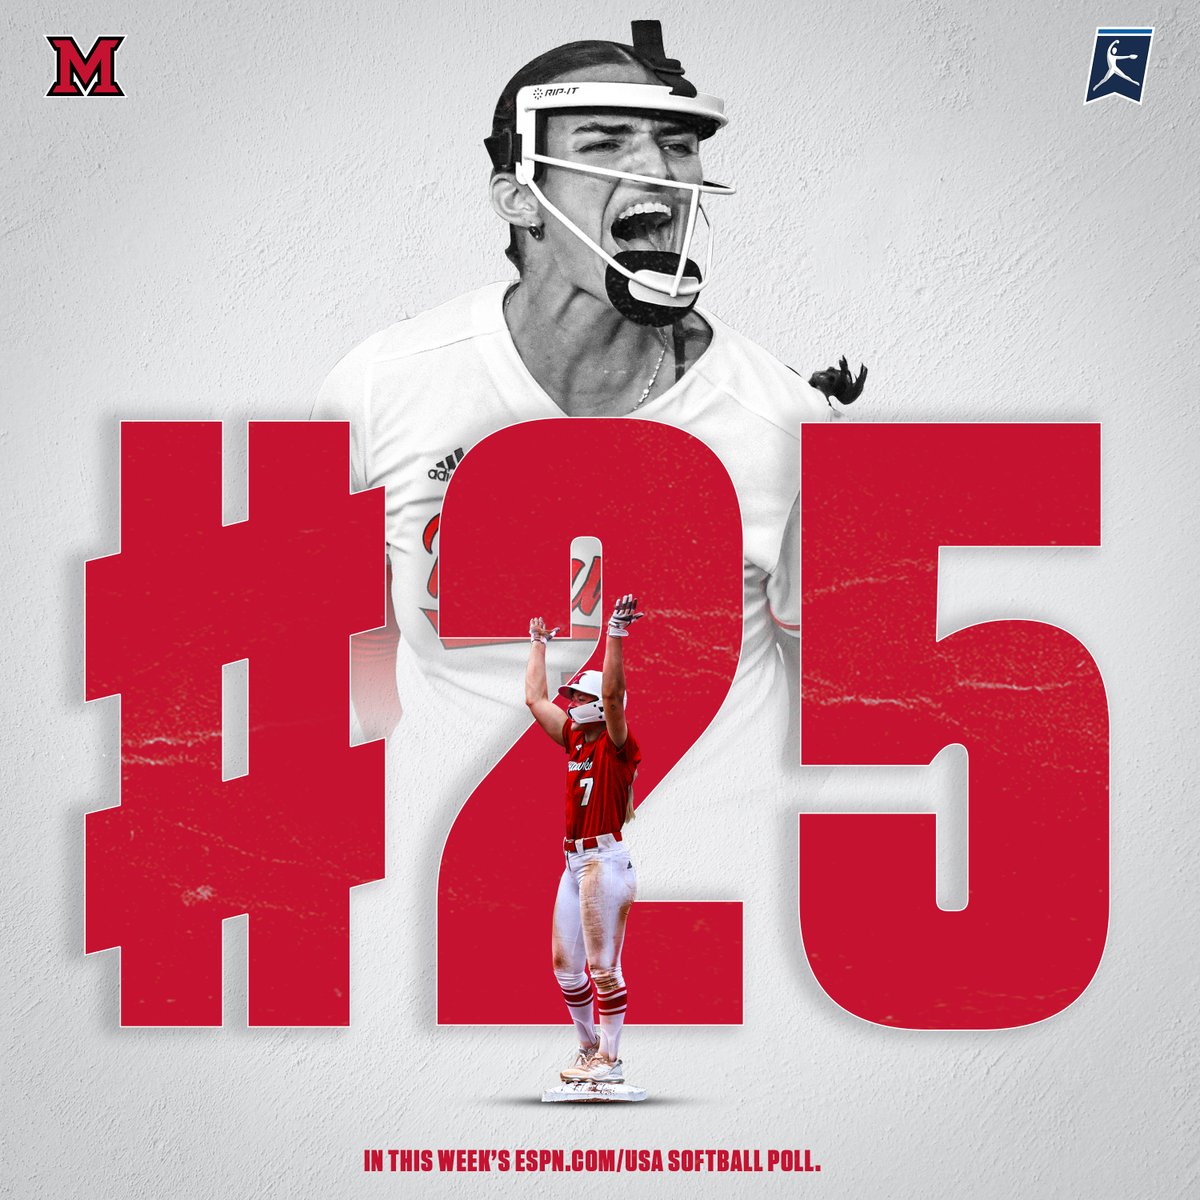 ‼️ 𝕋𝕆ℙ 𝟚𝟝 ‼️ Your RedHawks are ranked in another poll as ESPN ranks them at #25! #RiseUpRedHawks